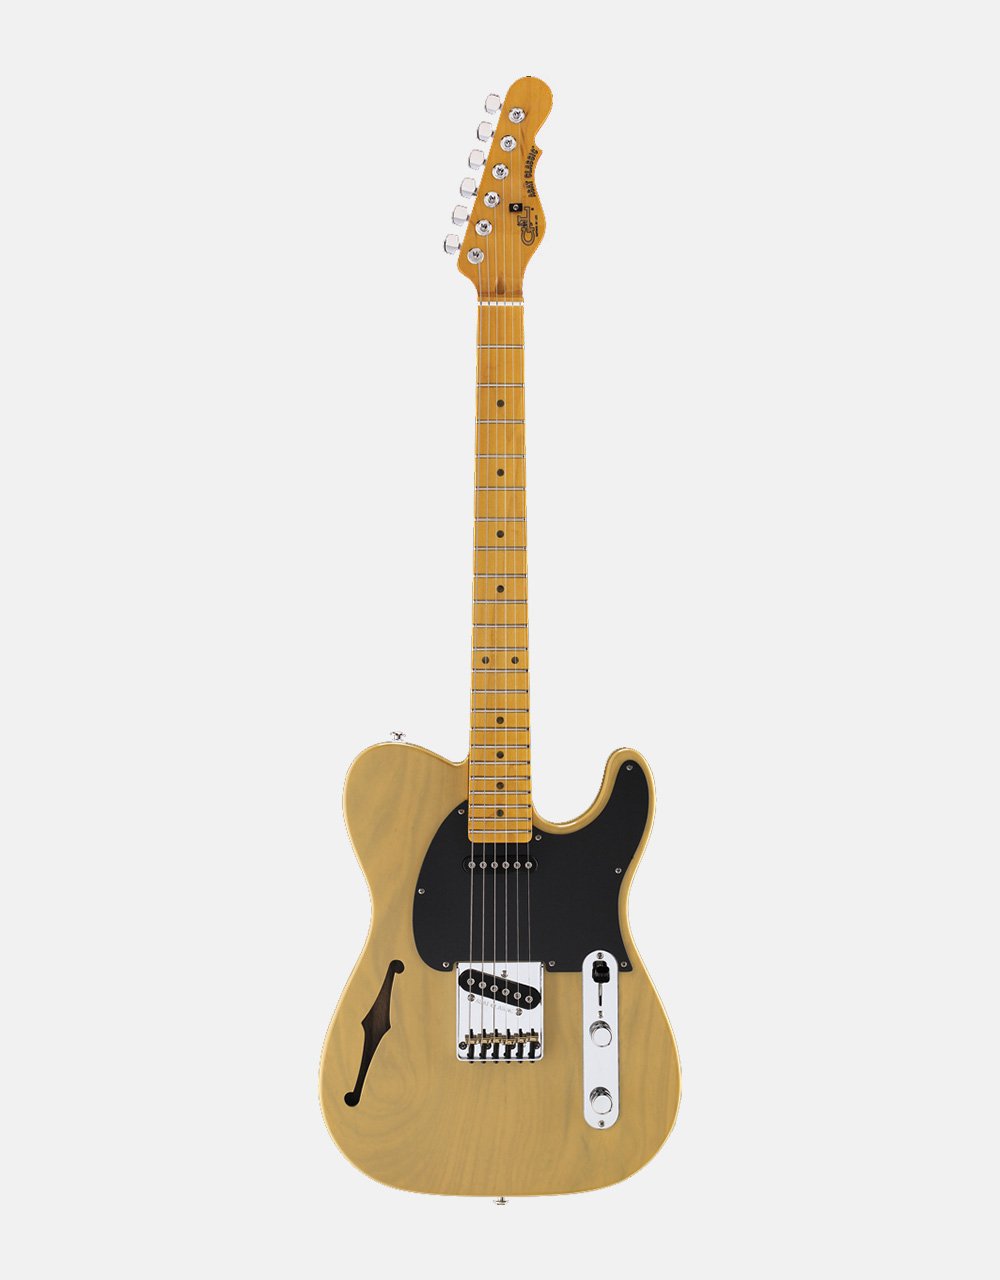 Build To Order ASAT® CLASSIC SEMI-HOLLOW | G&L Musical Instruments